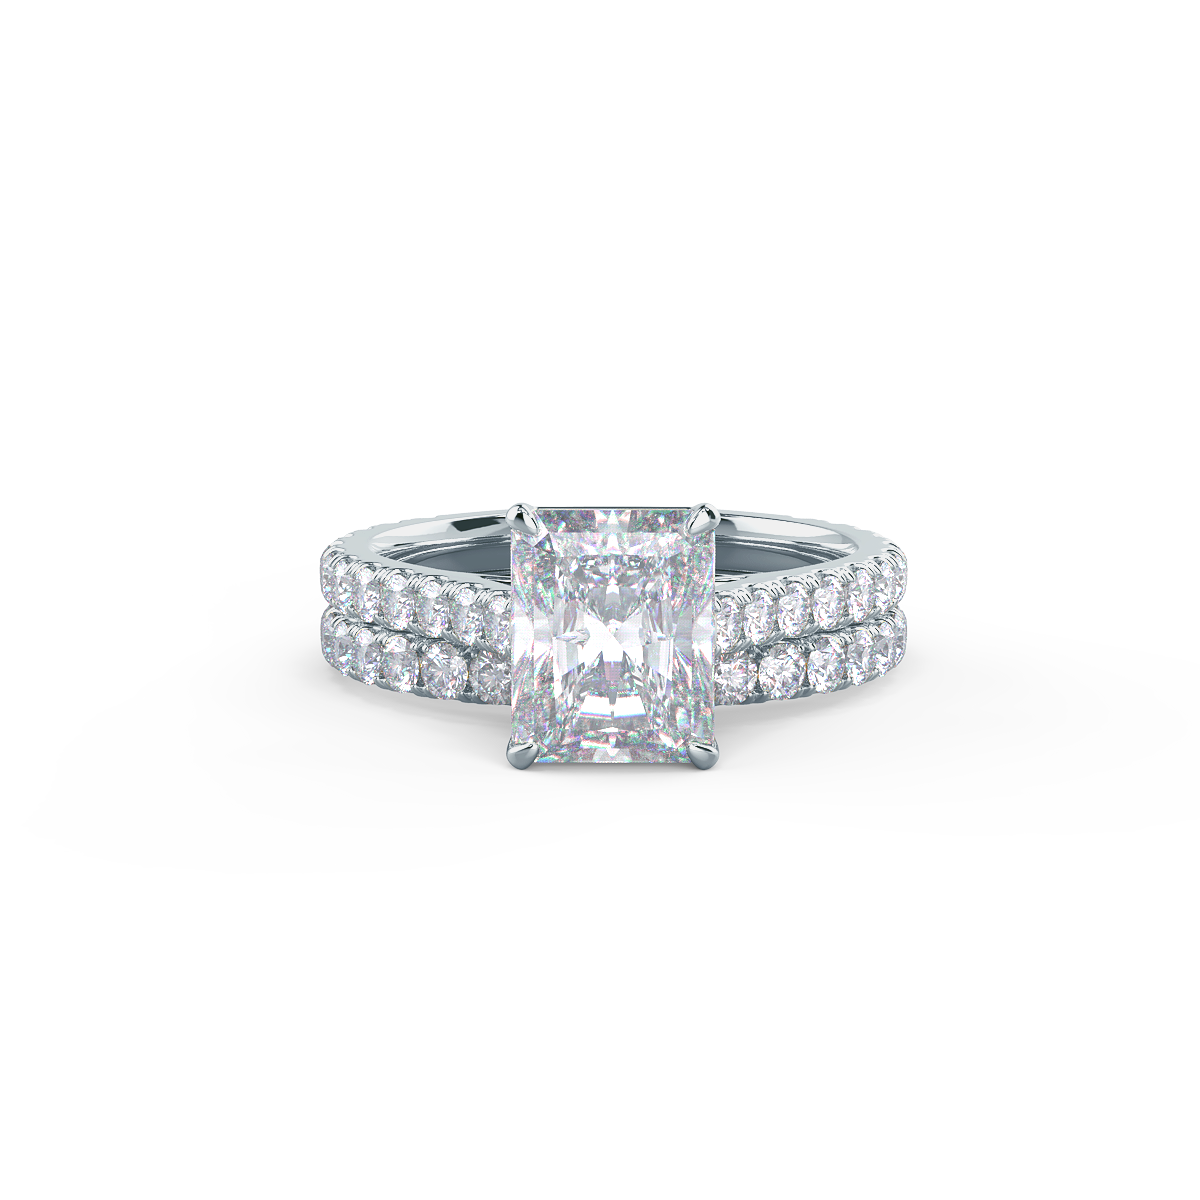  This setting can be made to allow a wedding band to sit nearly flush.    Shop All Wedding Bands   